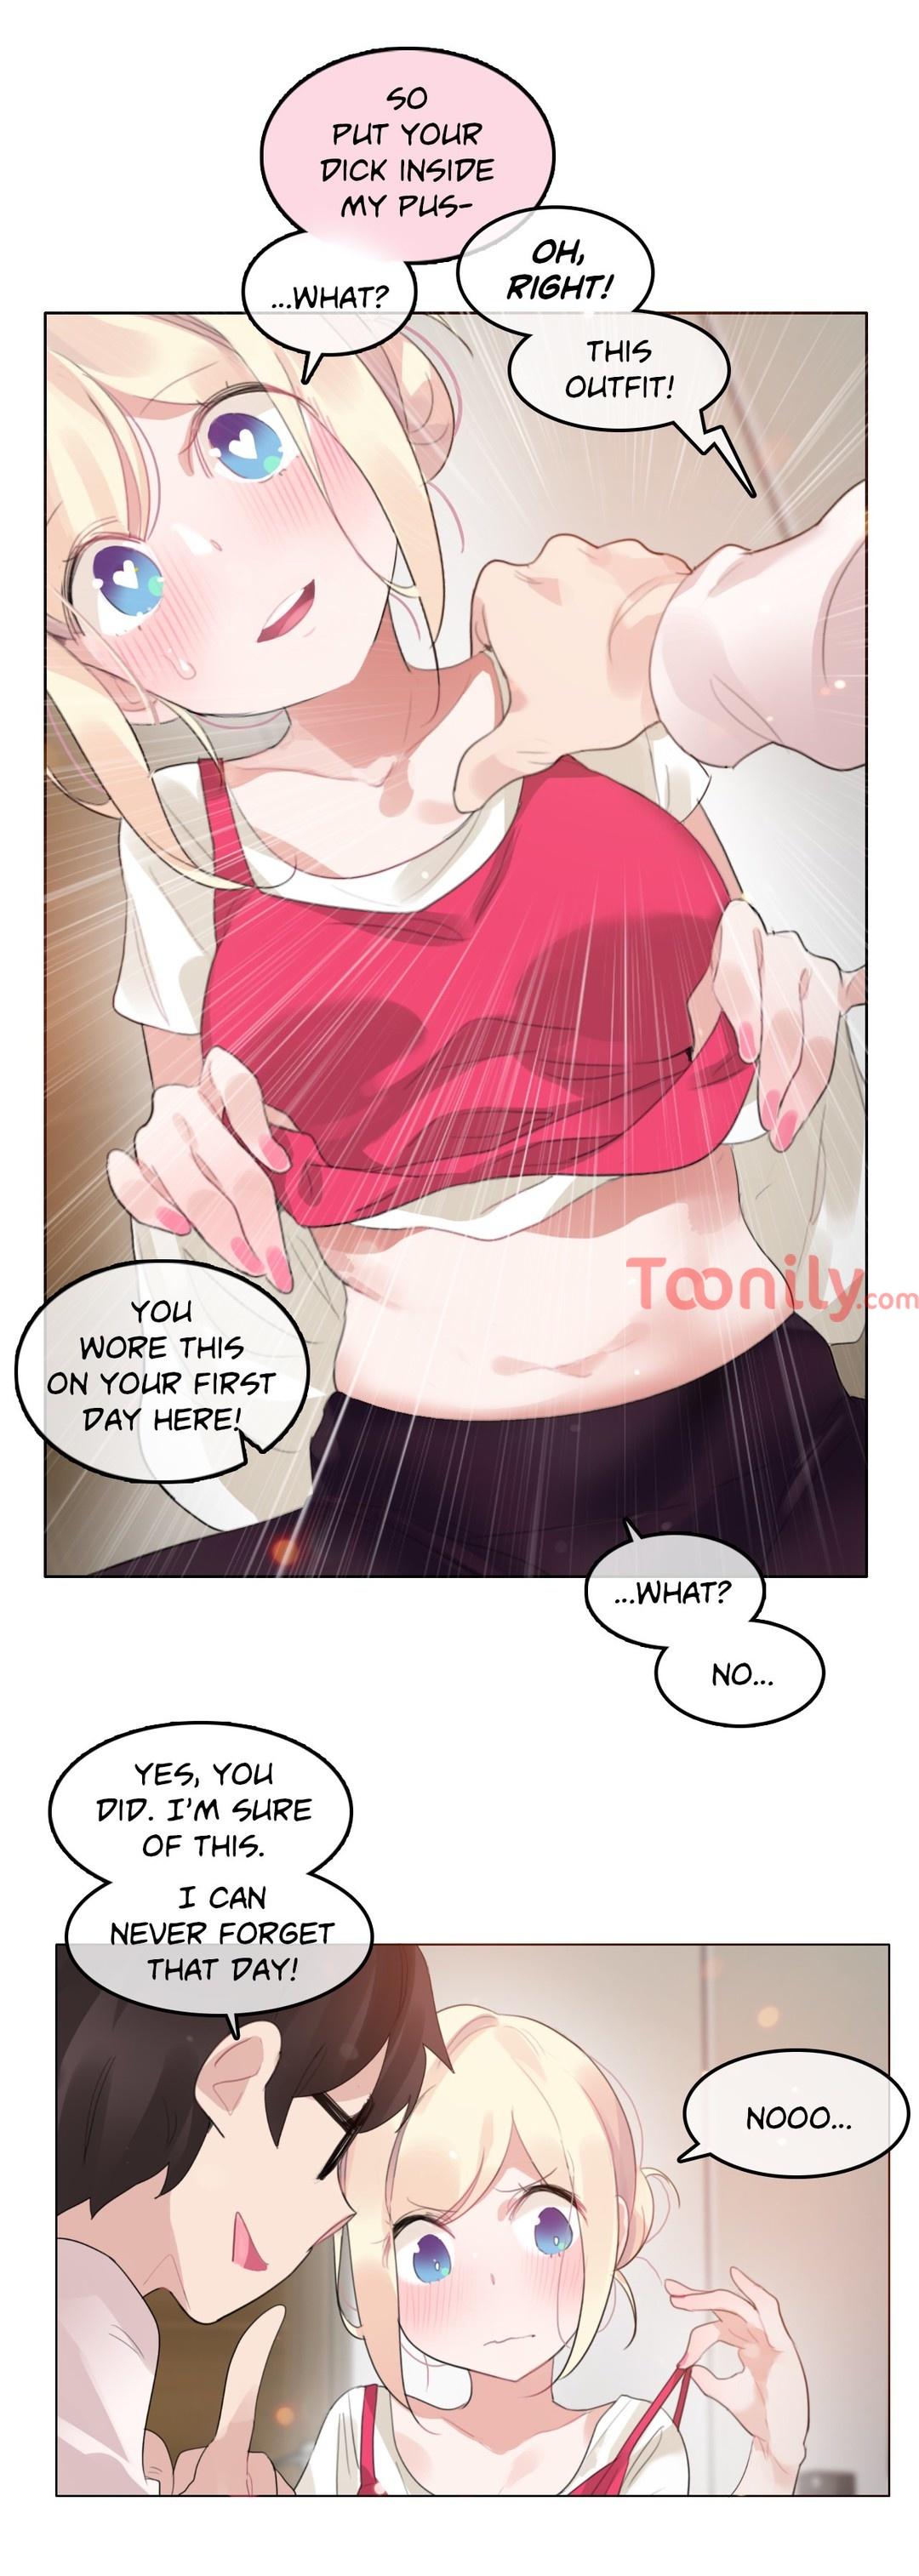 A Pervert's Daily Life • Chapter 61-65 103